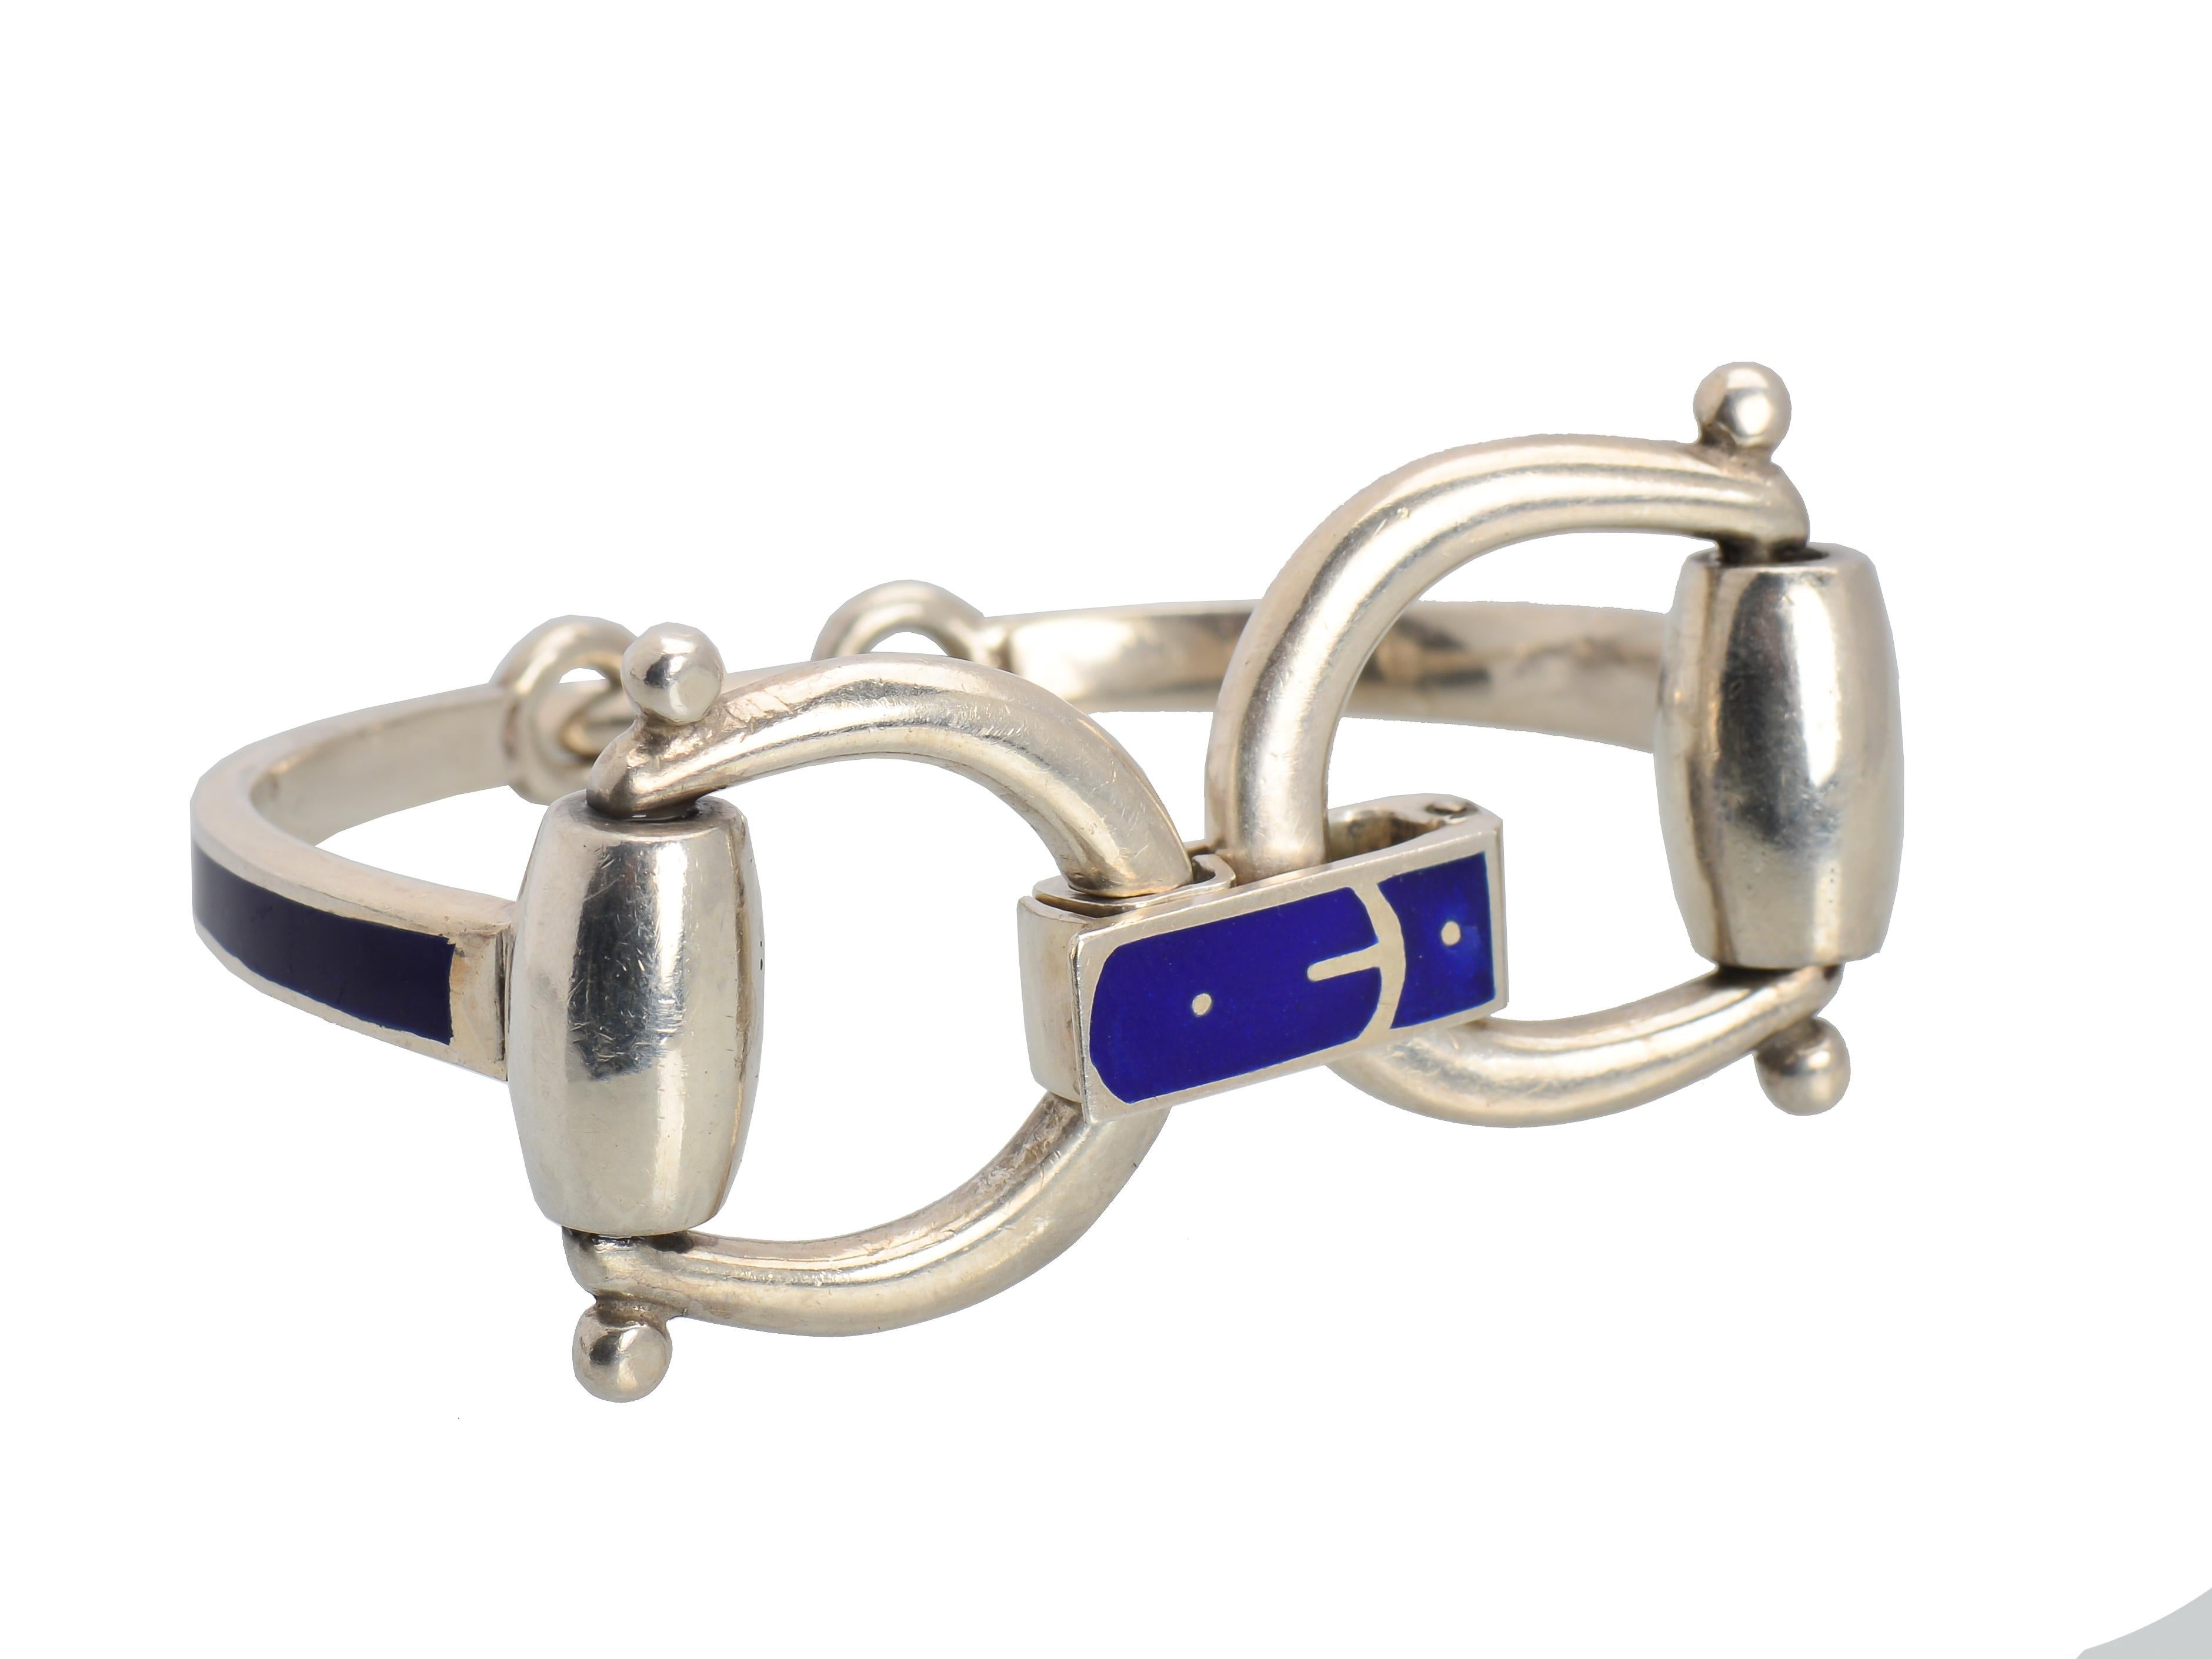 The Iconic design of this sterling silver and blue enamel bracelet is quickly recognizable as a Gucci equestrian design bracelet. The bangle has a bridal bit and buckle closure. This is a scarce example of this vintage bracelet that has always been